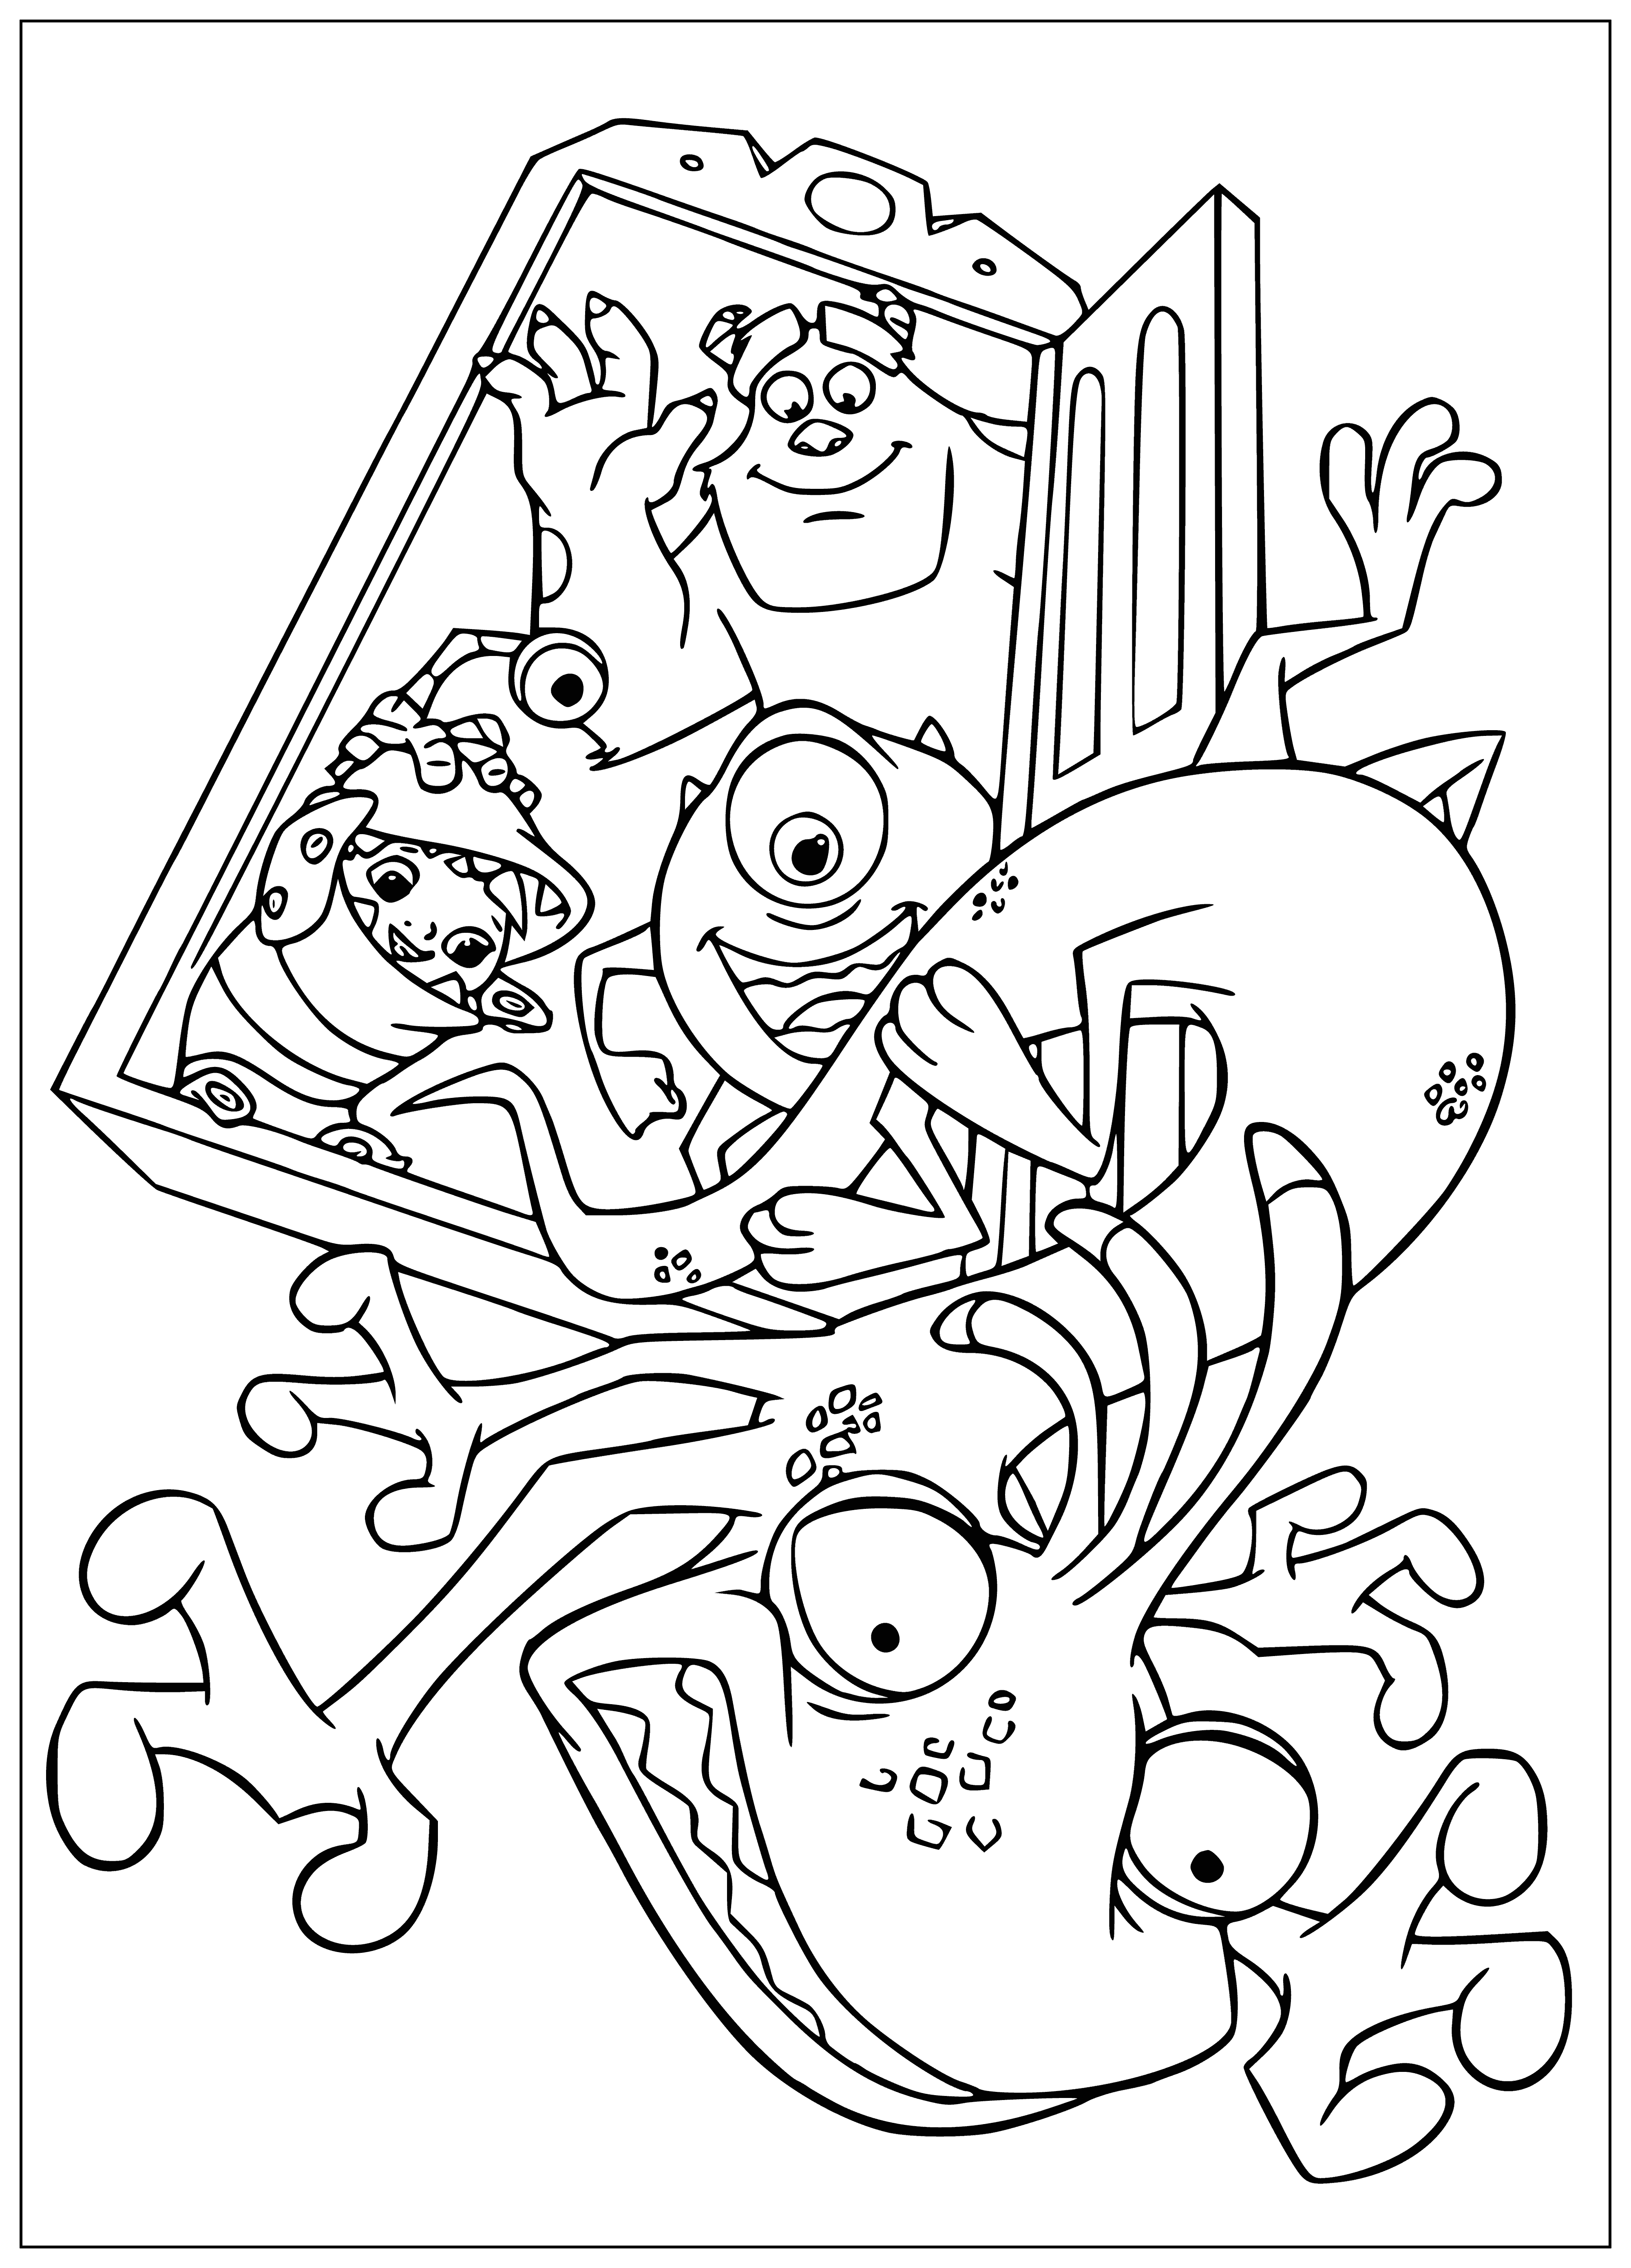 coloring page: Randall flies with arms outstretched and a look of concentration, screaming in excitement. Eyes closed.